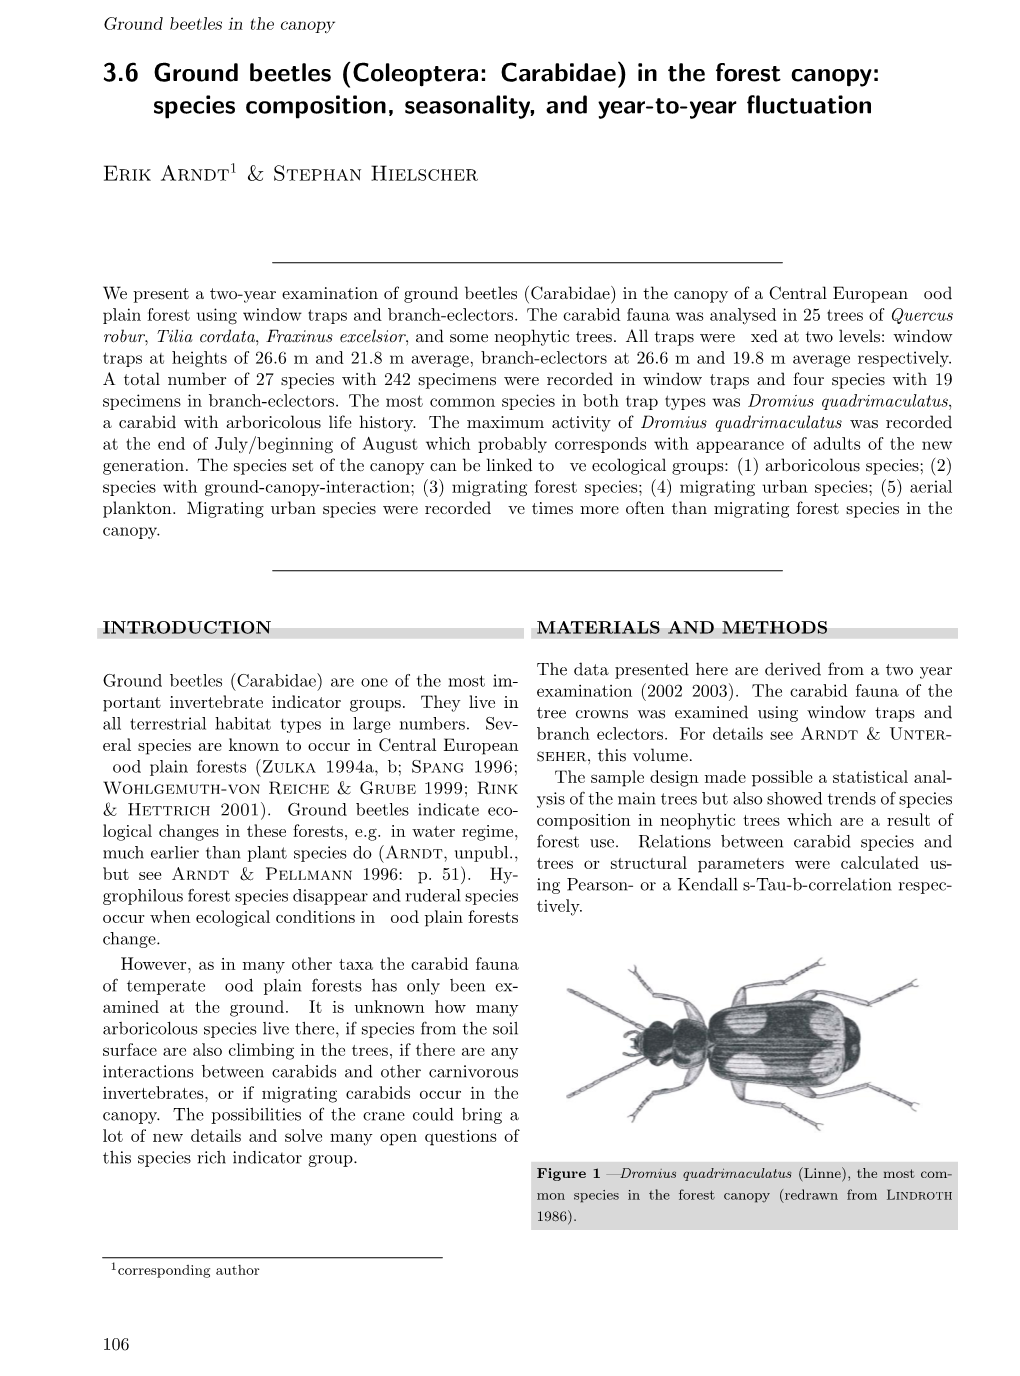 3.6 Ground Beetles (Coleoptera: Carabidae) in the Forest Canopy: Species Composition, Seasonality, and Year-To-Year ﬂuctuation